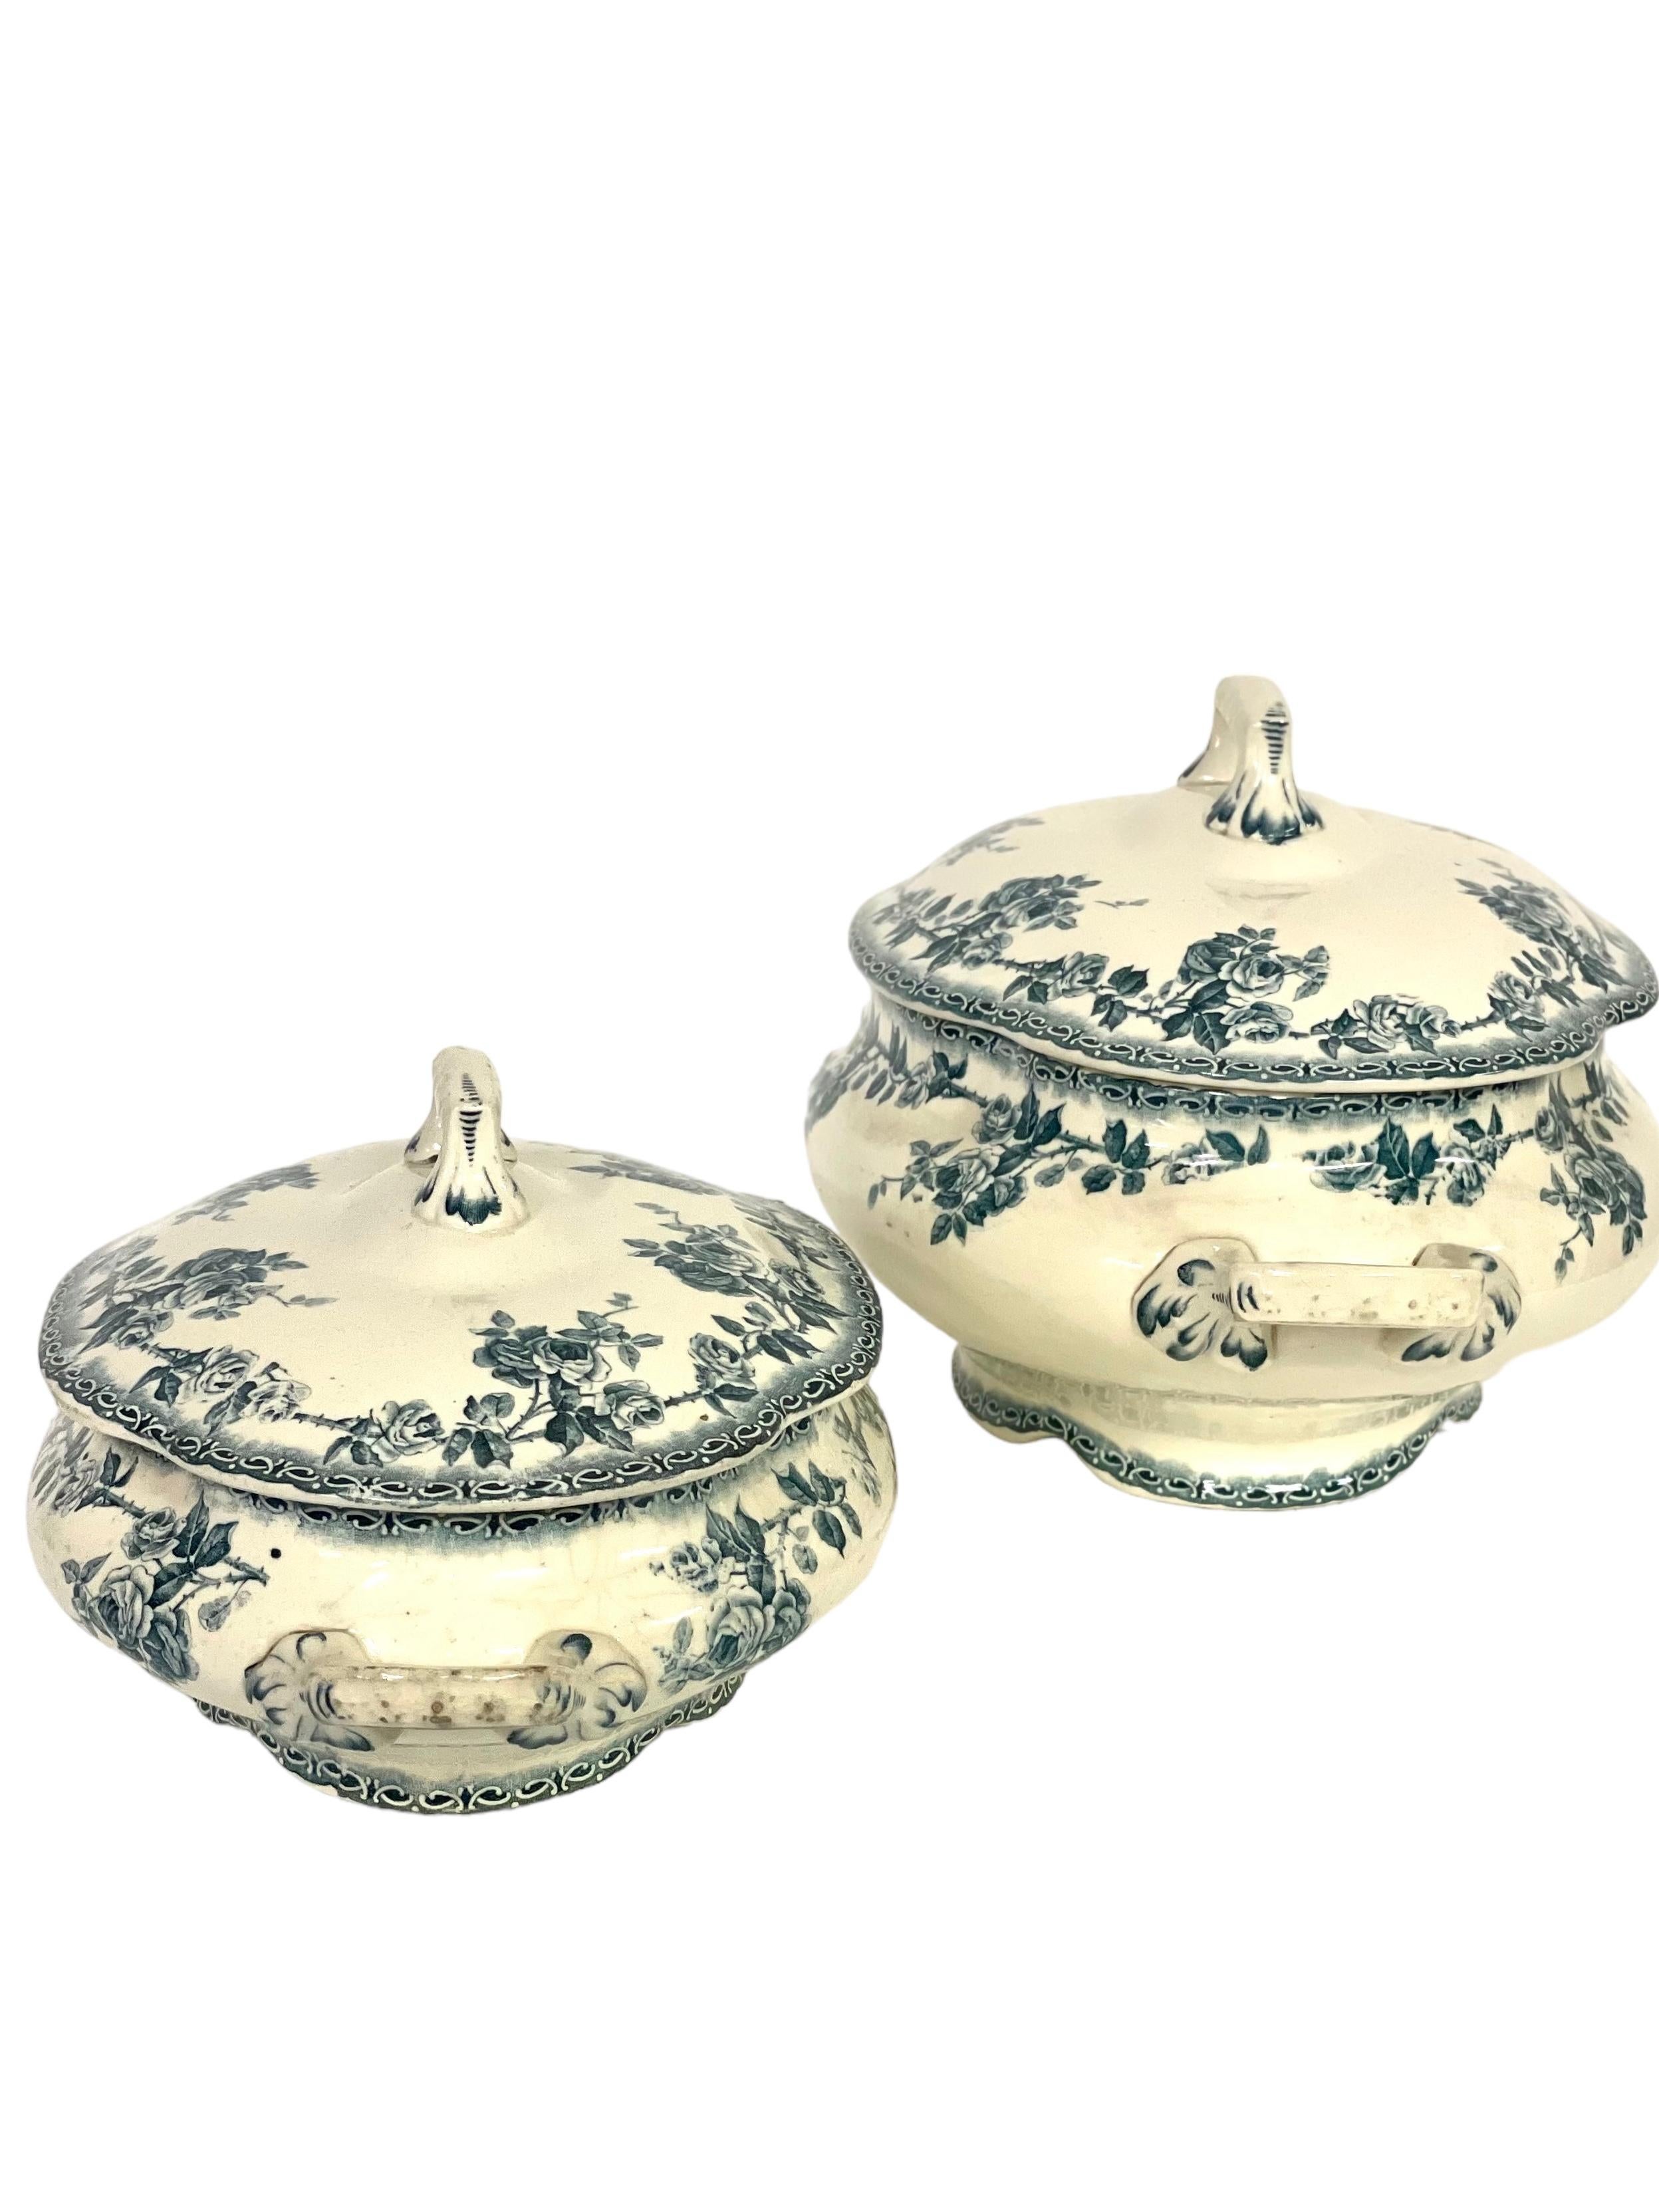 A splendid pair of antique French ironstone lidded soup tureens, or legumières, similar in design, although not identical. Once used for serving vegetables or soup at the dinner table, they are in good vintage used condition, nicely shaped and ivory